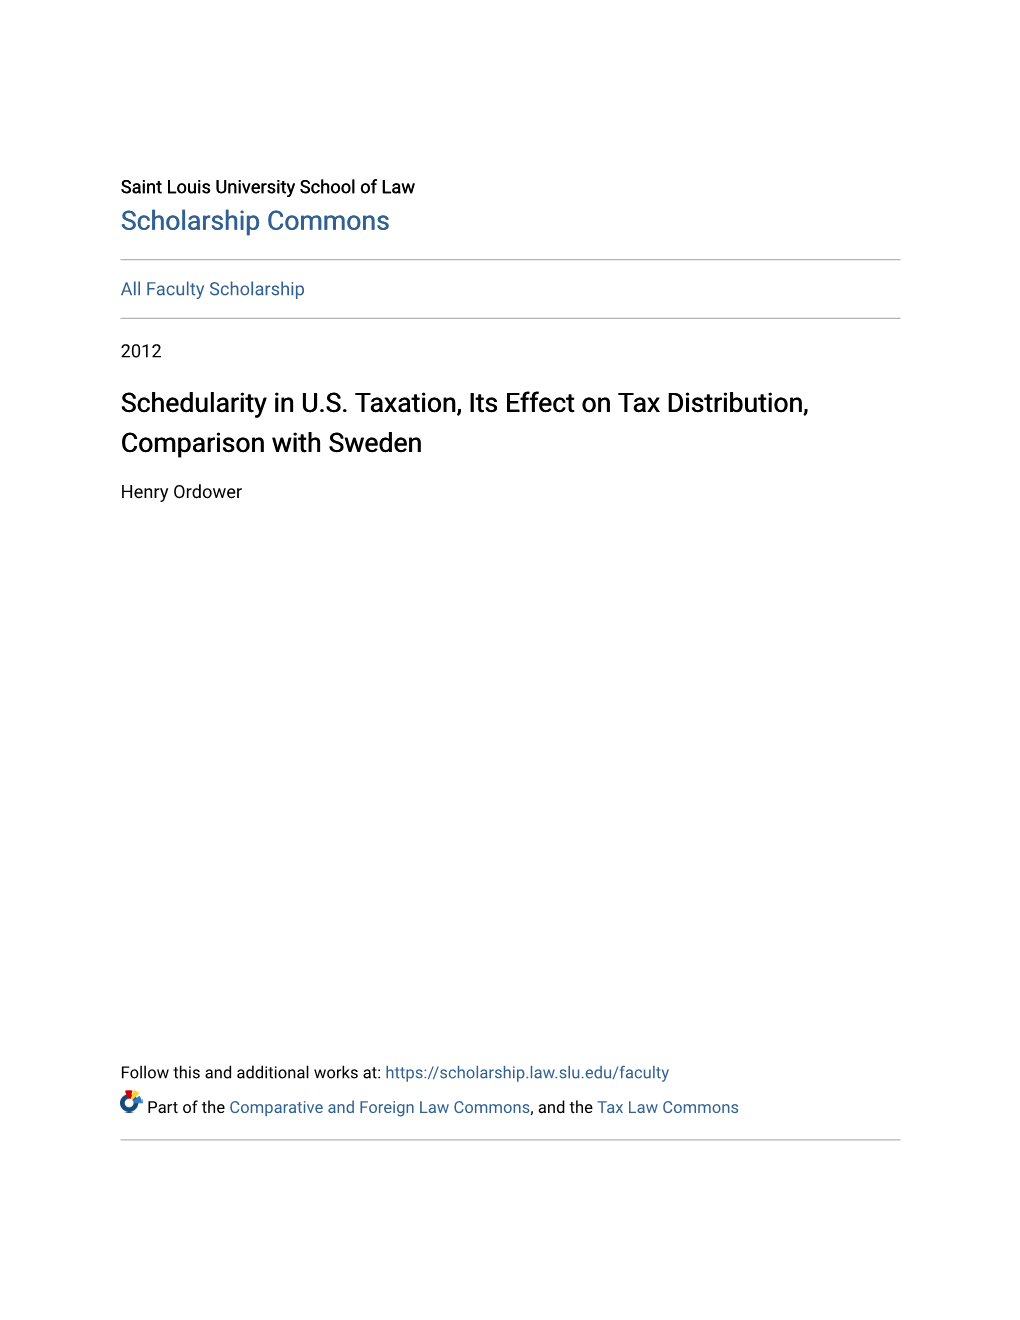 Schedularity in U.S. Taxation, Its Effect on Tax Distribution, Comparison with Sweden